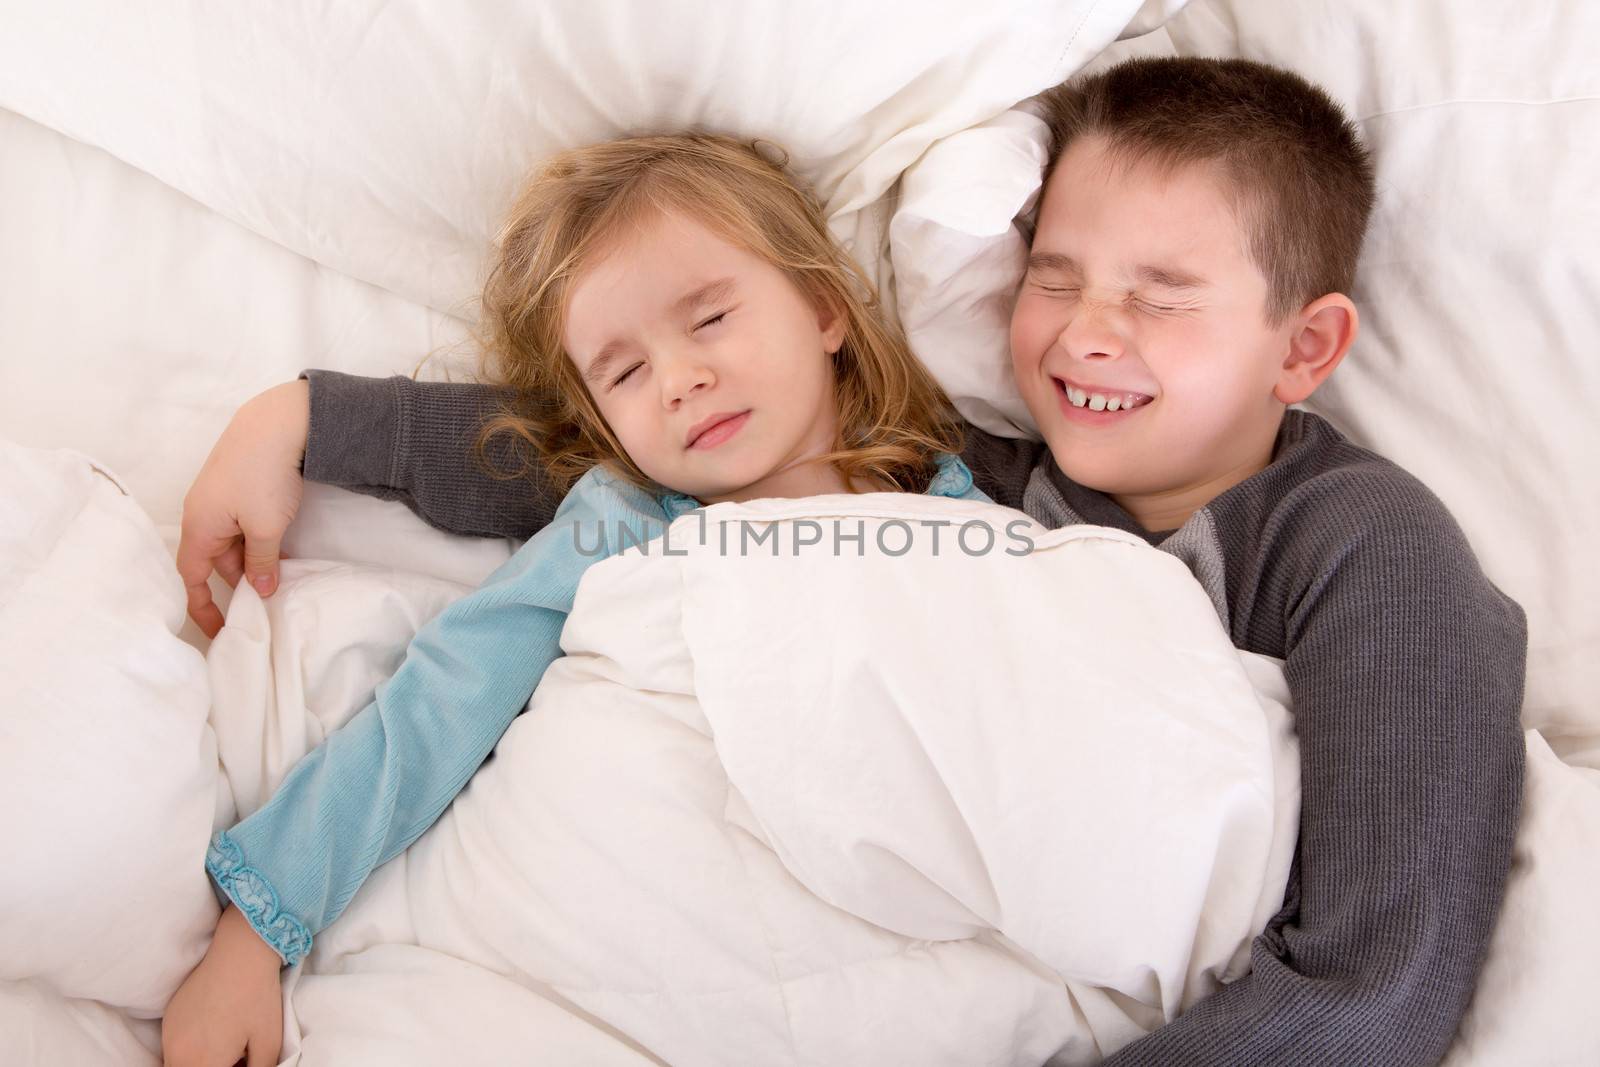 Two cute young children sleeping together sharing the same bed with a little boy protectively, cuddling his younger sister